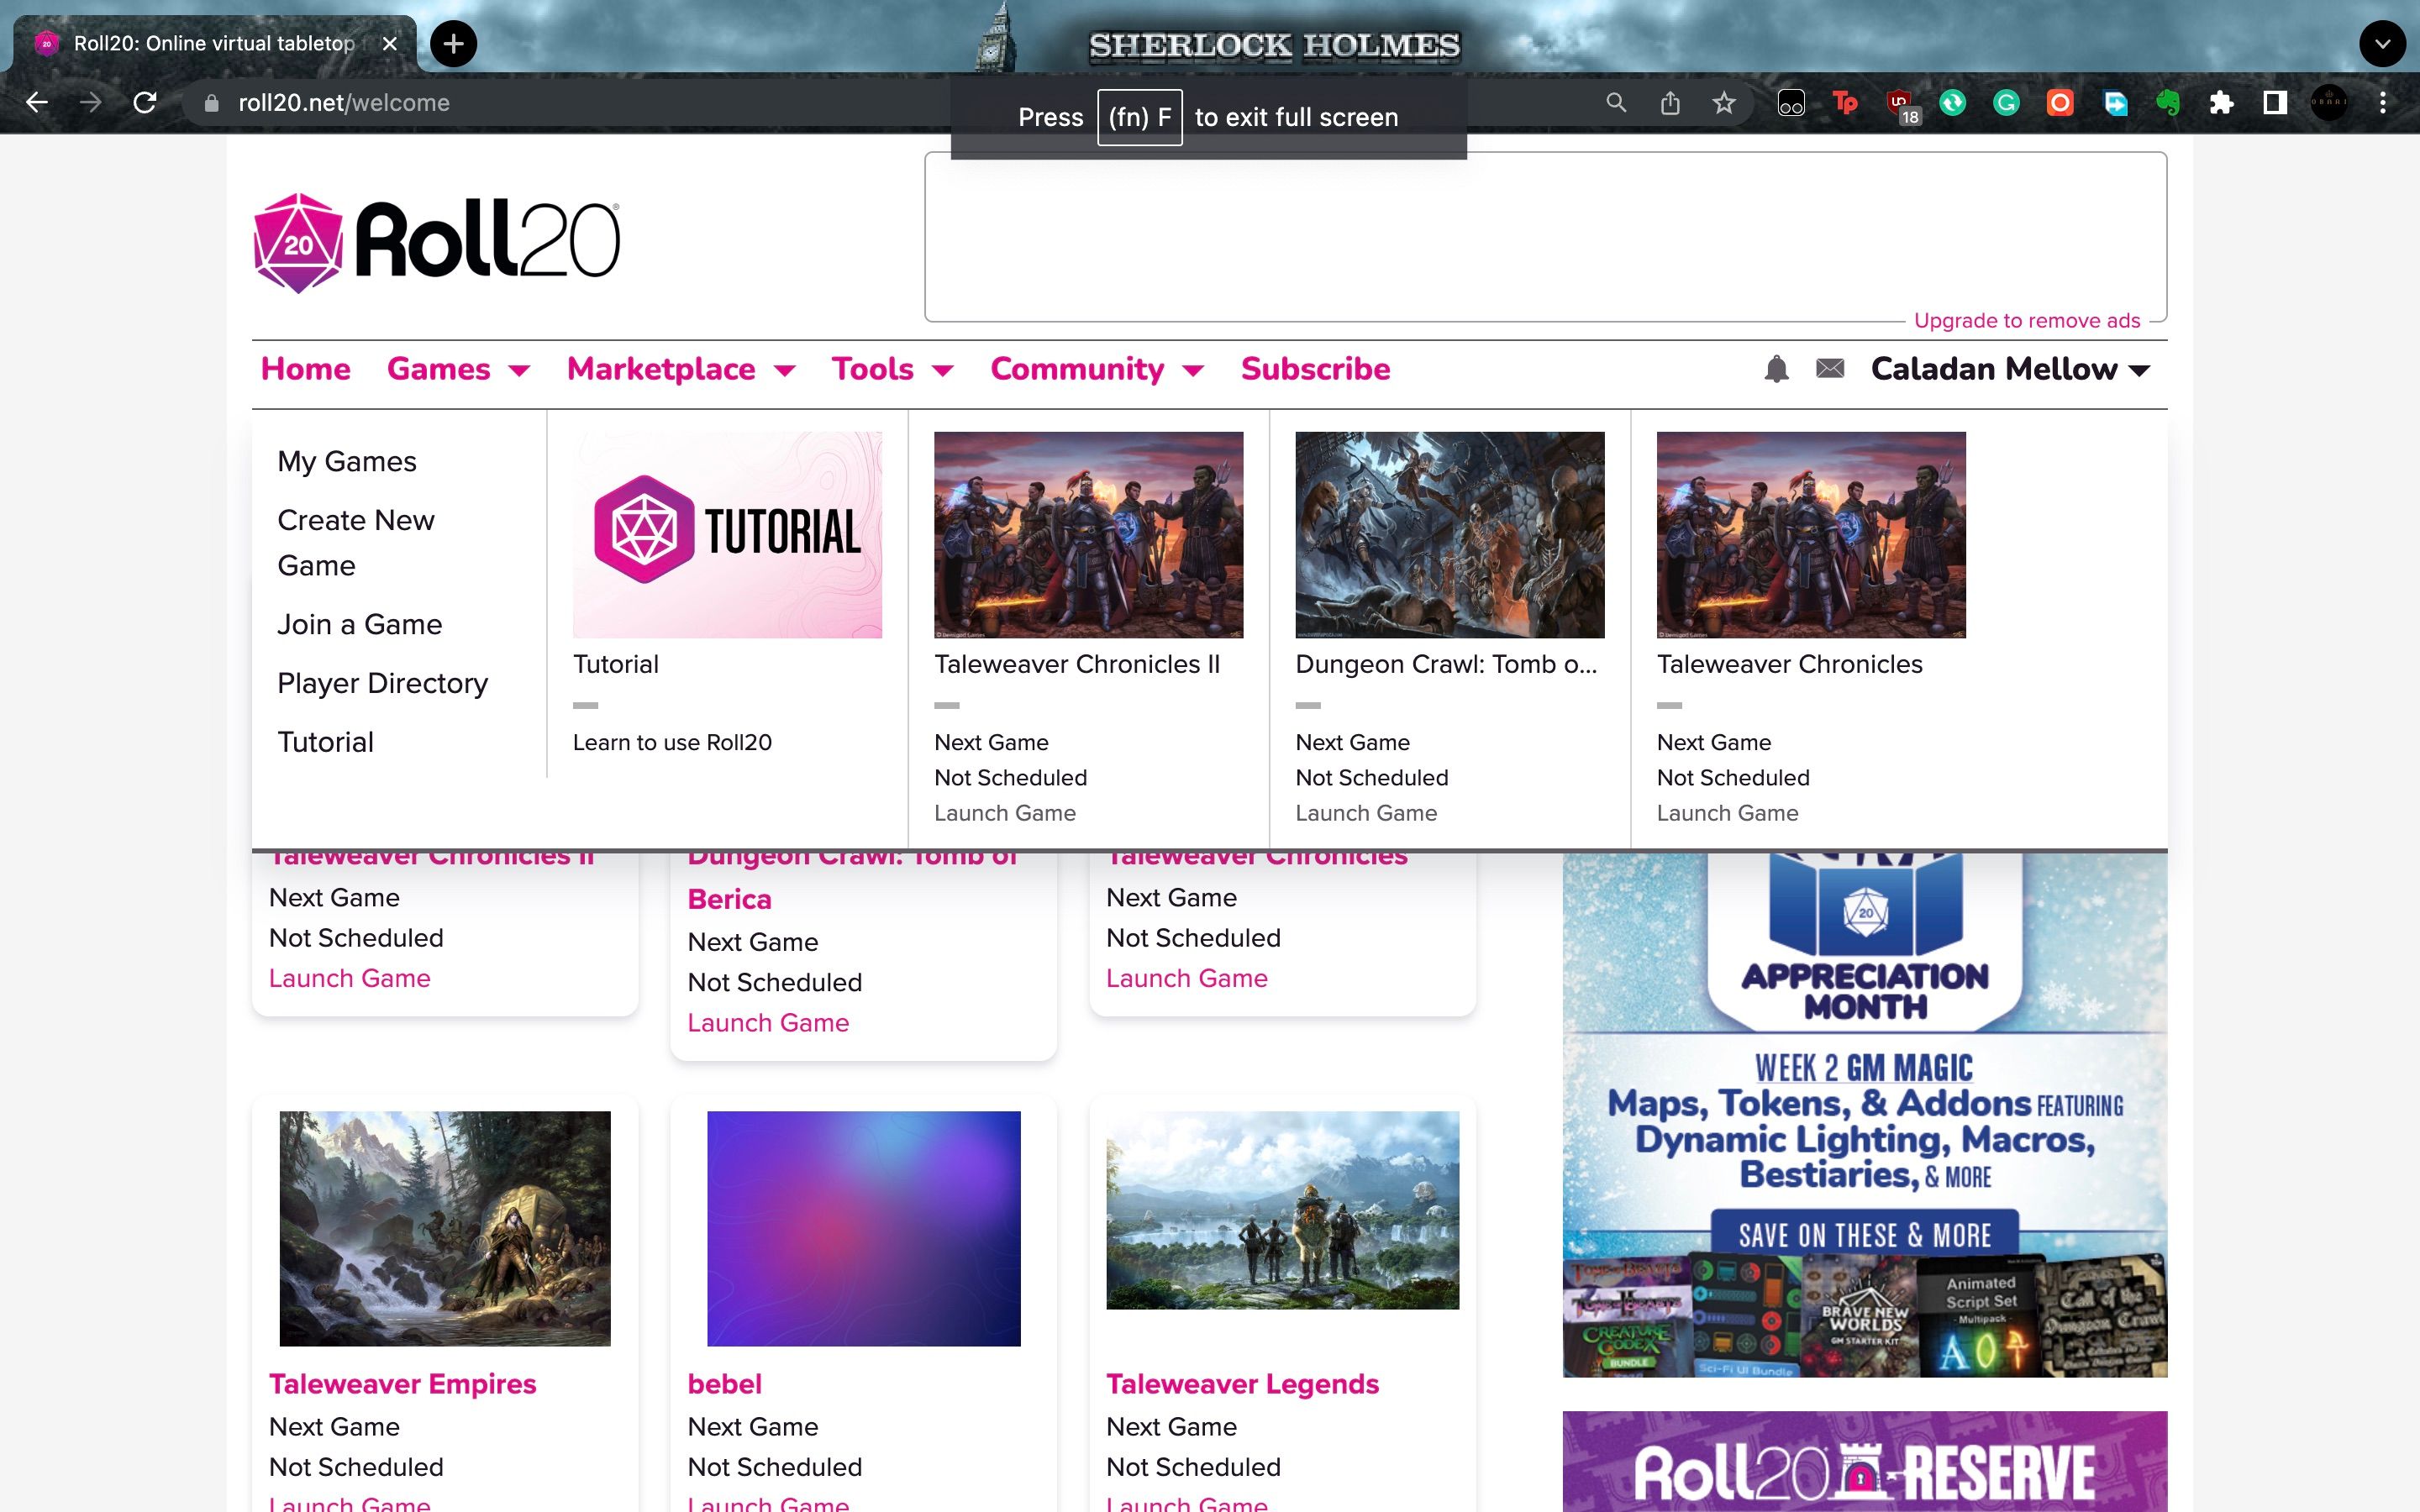 Roll20 home page displaying a list of games